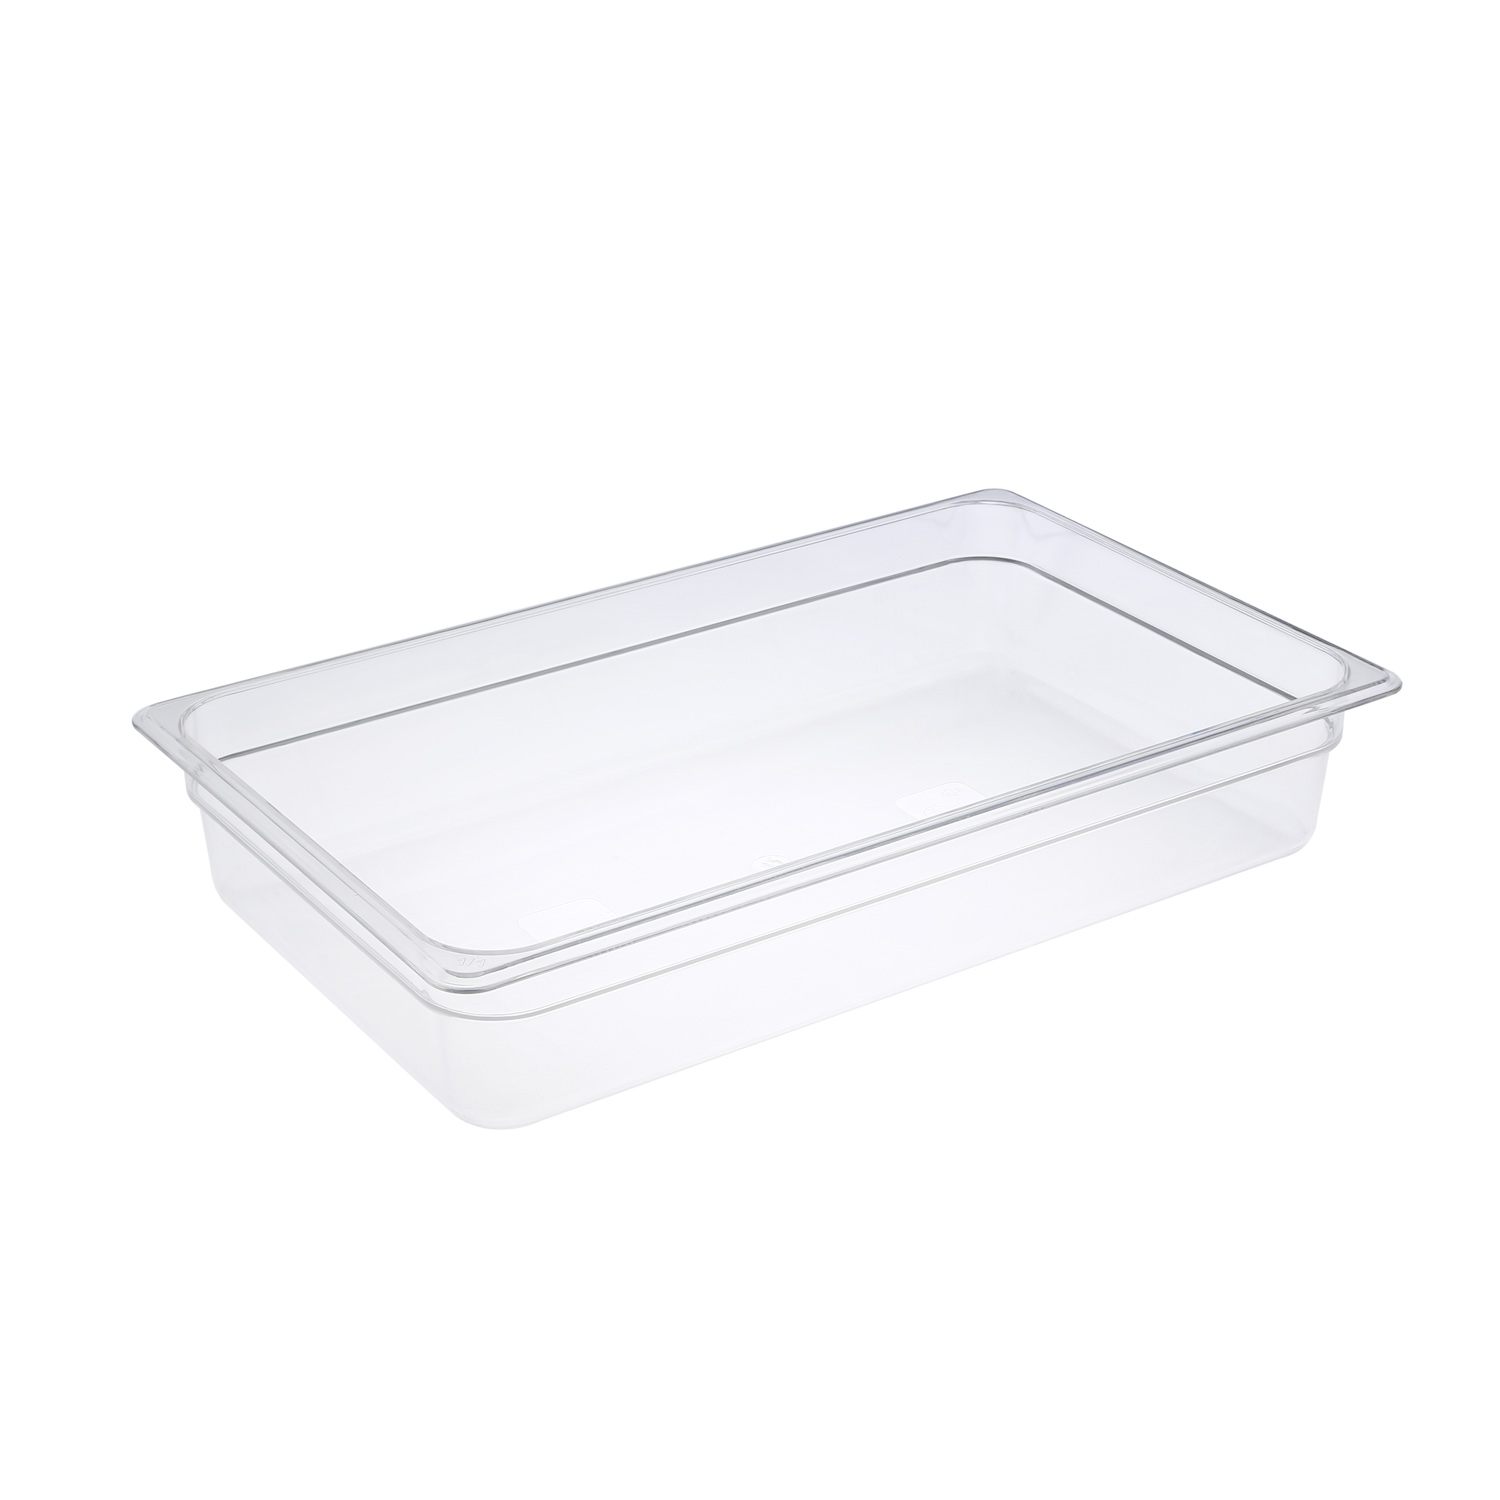 CAC China PCFP-F4 Full Size Polycarbonate Food Pan 4" Deep